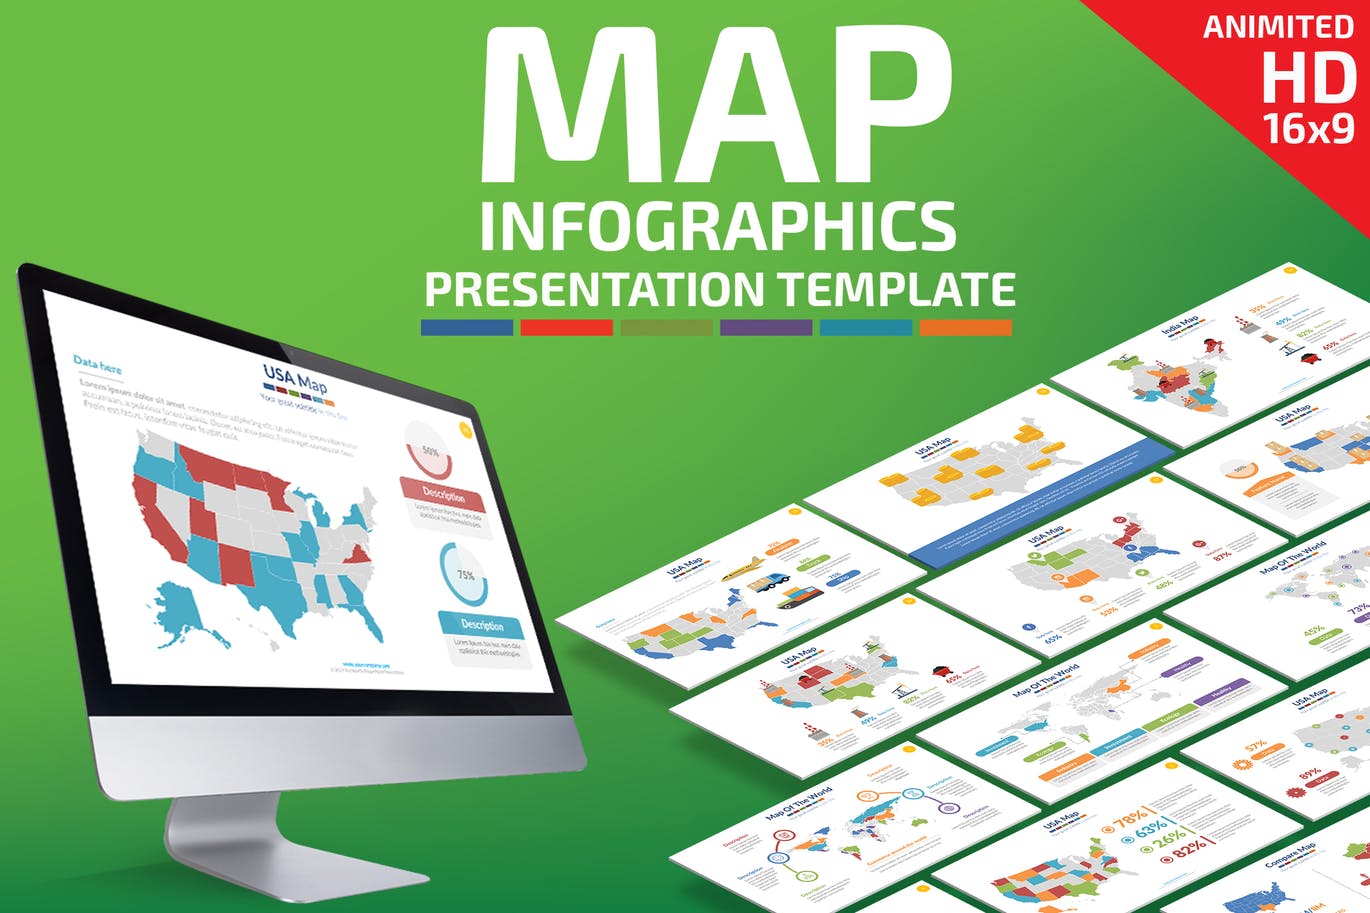 Map Infographic PowerPoint Presentation Template